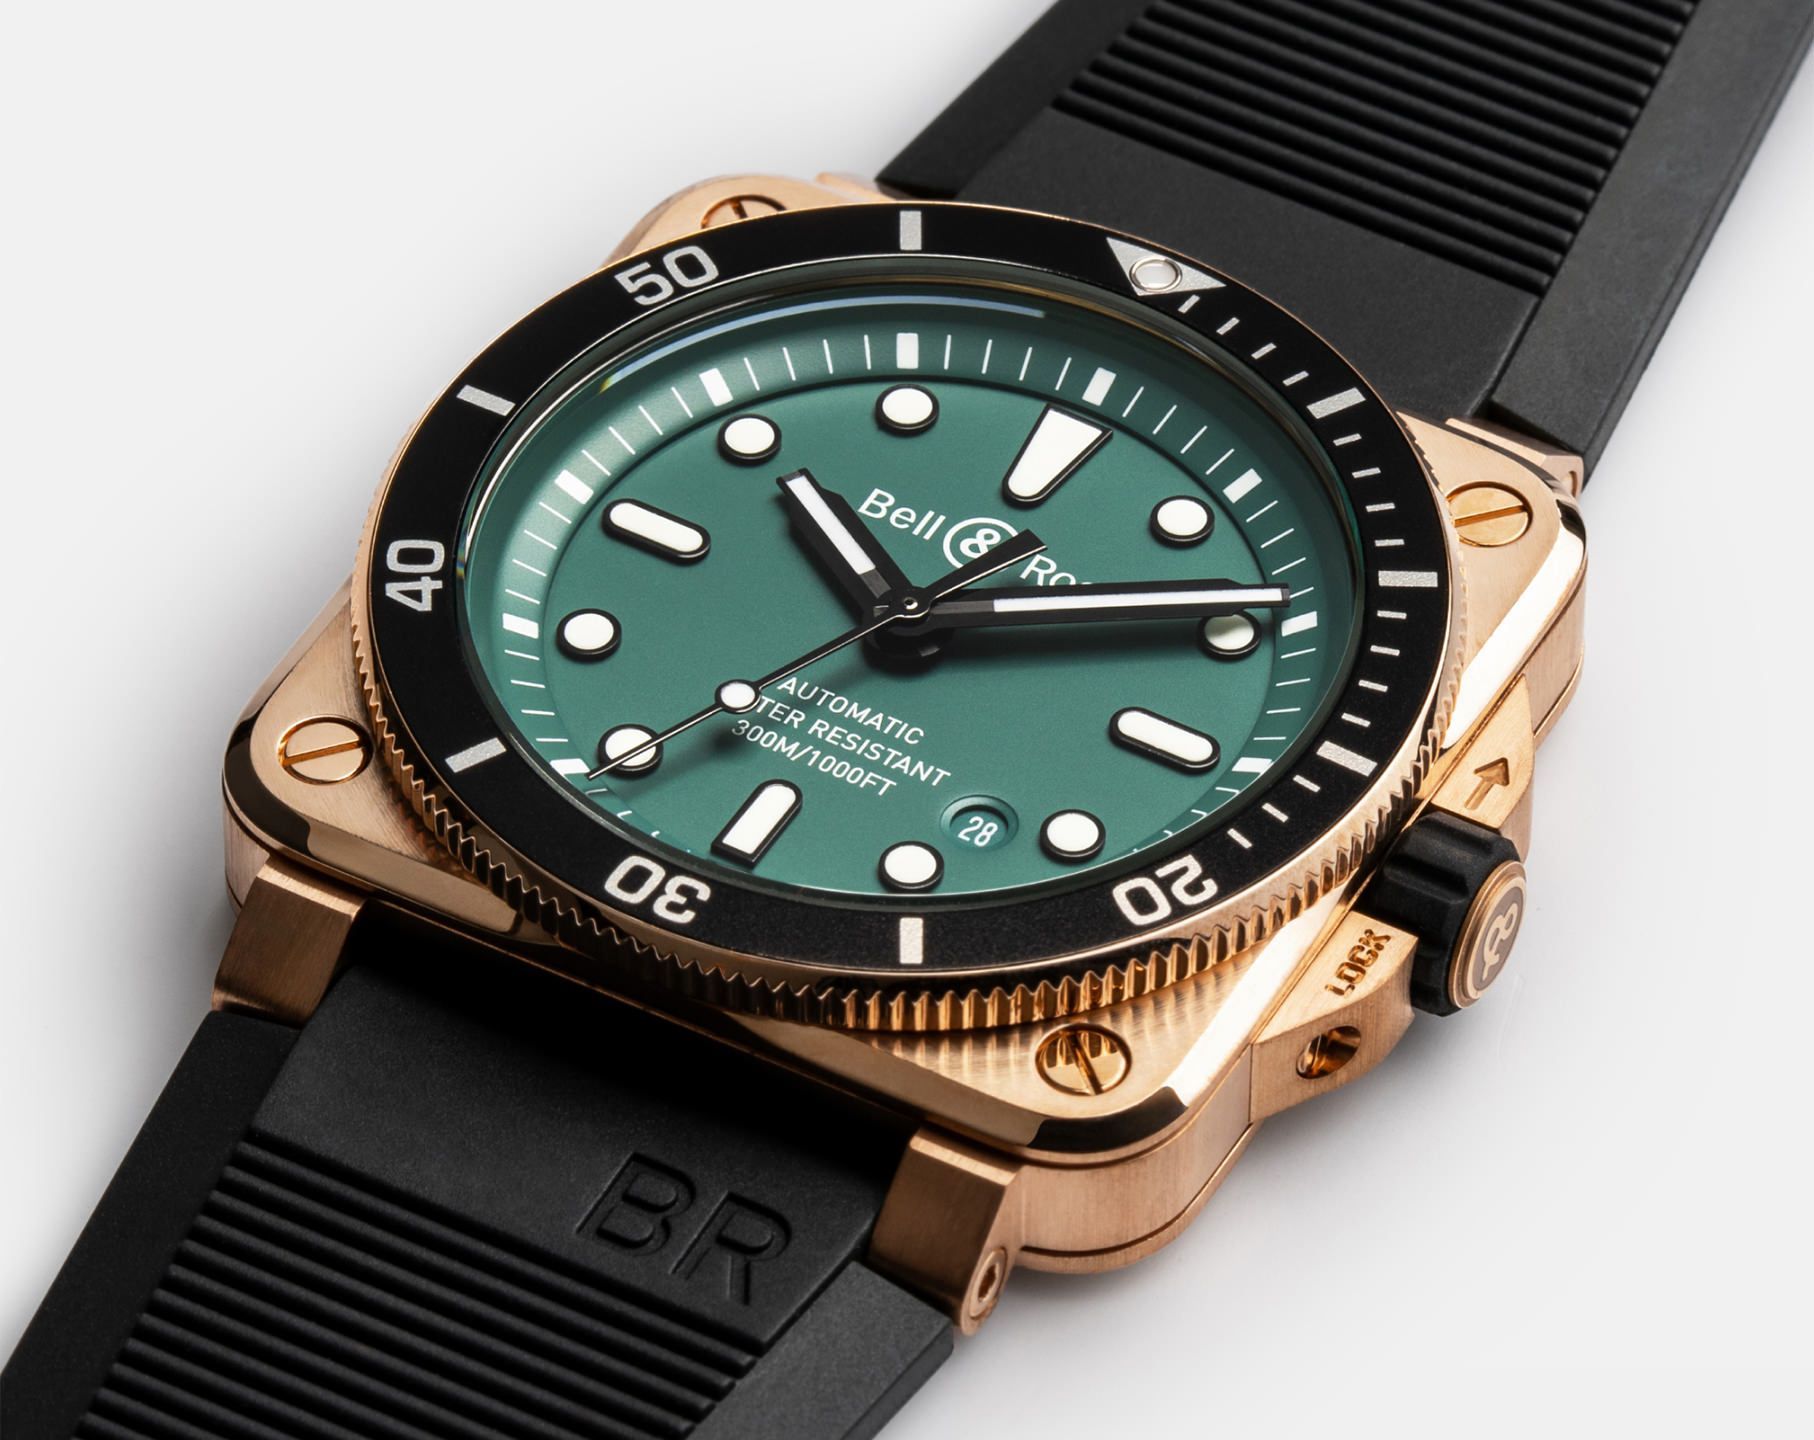 Bell & Ross Instruments BR 03 Diver Green Dial 42 mm Automatic Watch For Men - 5